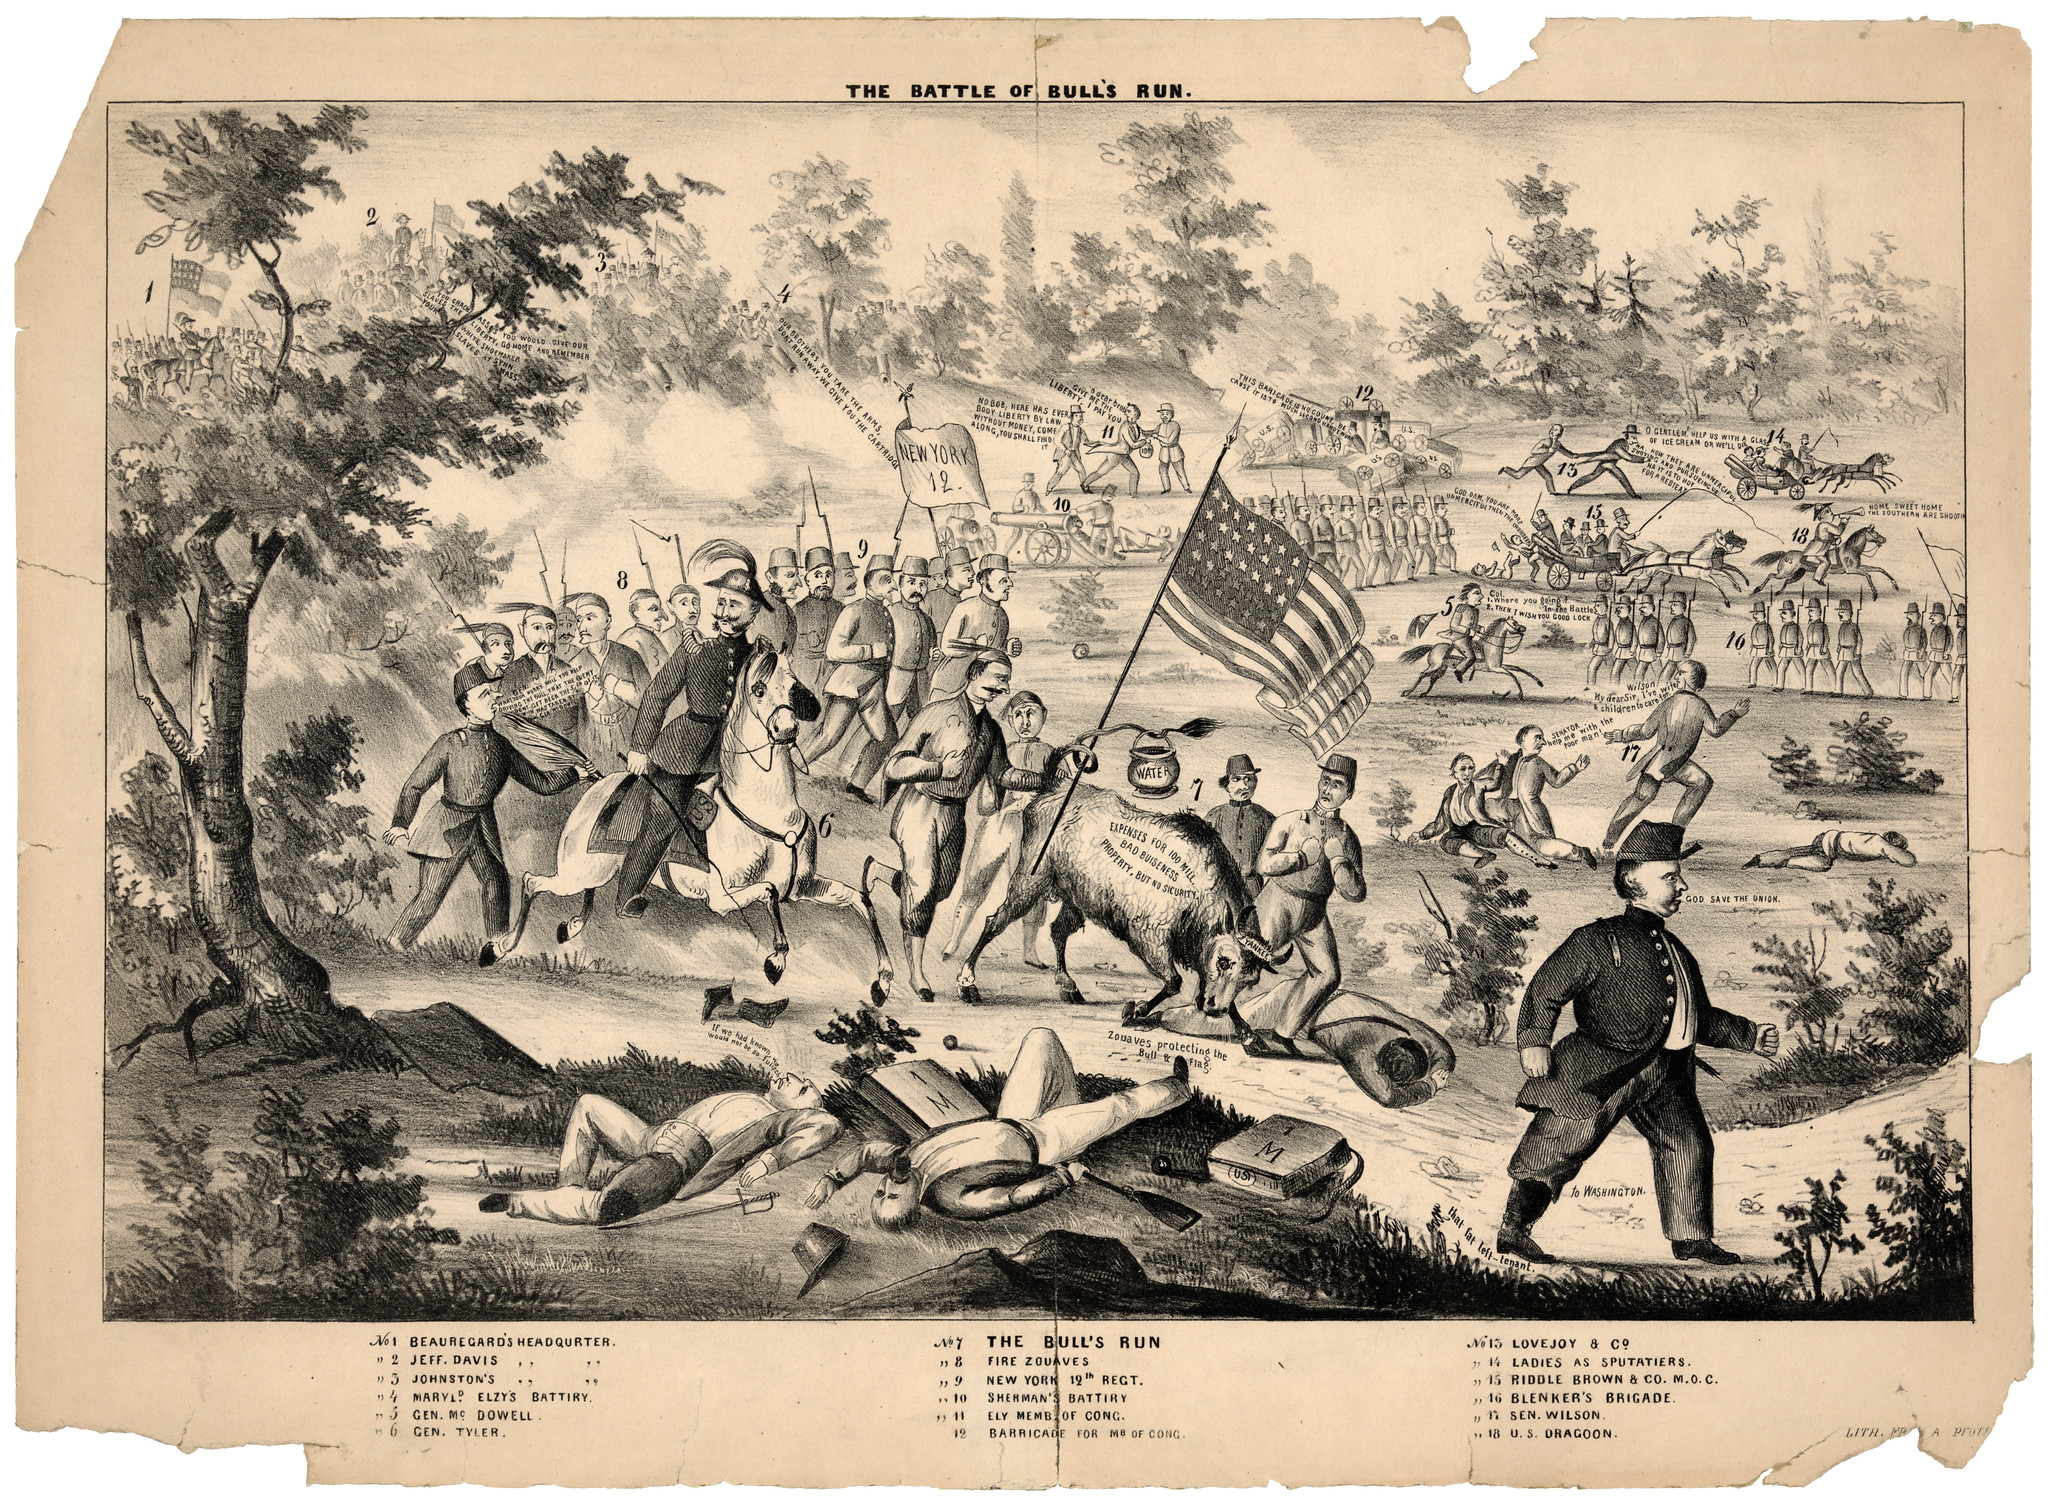 The Battle of Bull's Run - Cartoon print shows Union troops after the Battle of Bull Run during the Civil War from the point of view of a copperhead, that is, a northern Democrat supporting Confederate troops. 